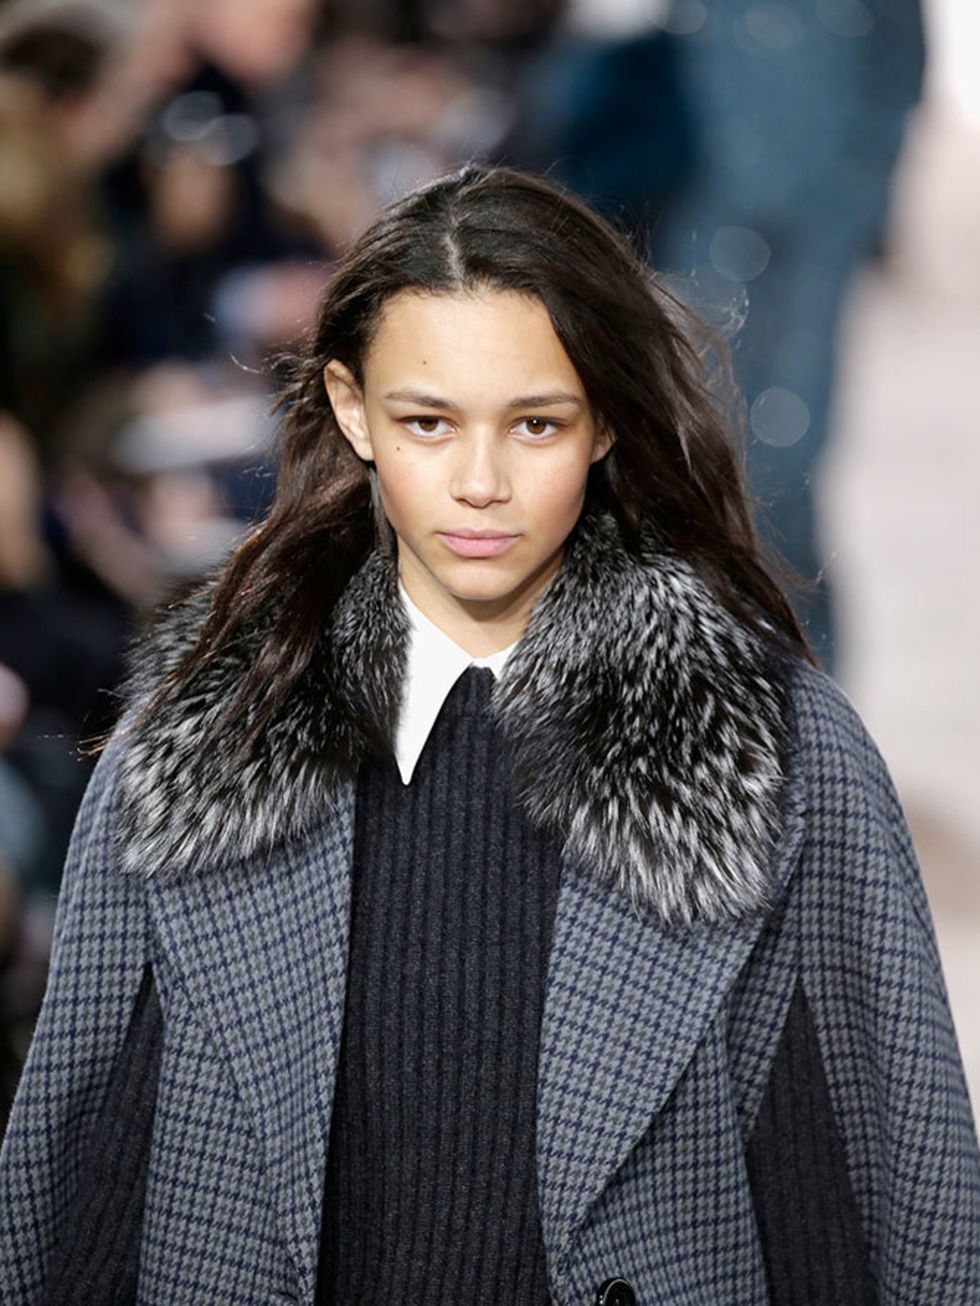 <p>Binx Walton, 19, <span style="line-height:1.6">Model</span></p>

<p>Tennesse-born skateboarding supermodel Binx (nicknamed by her two brothers after the <em>Star Wars</em> character Jar Jar) made her catwalk debut in 2013 as a Marc Jacobs exclusive and